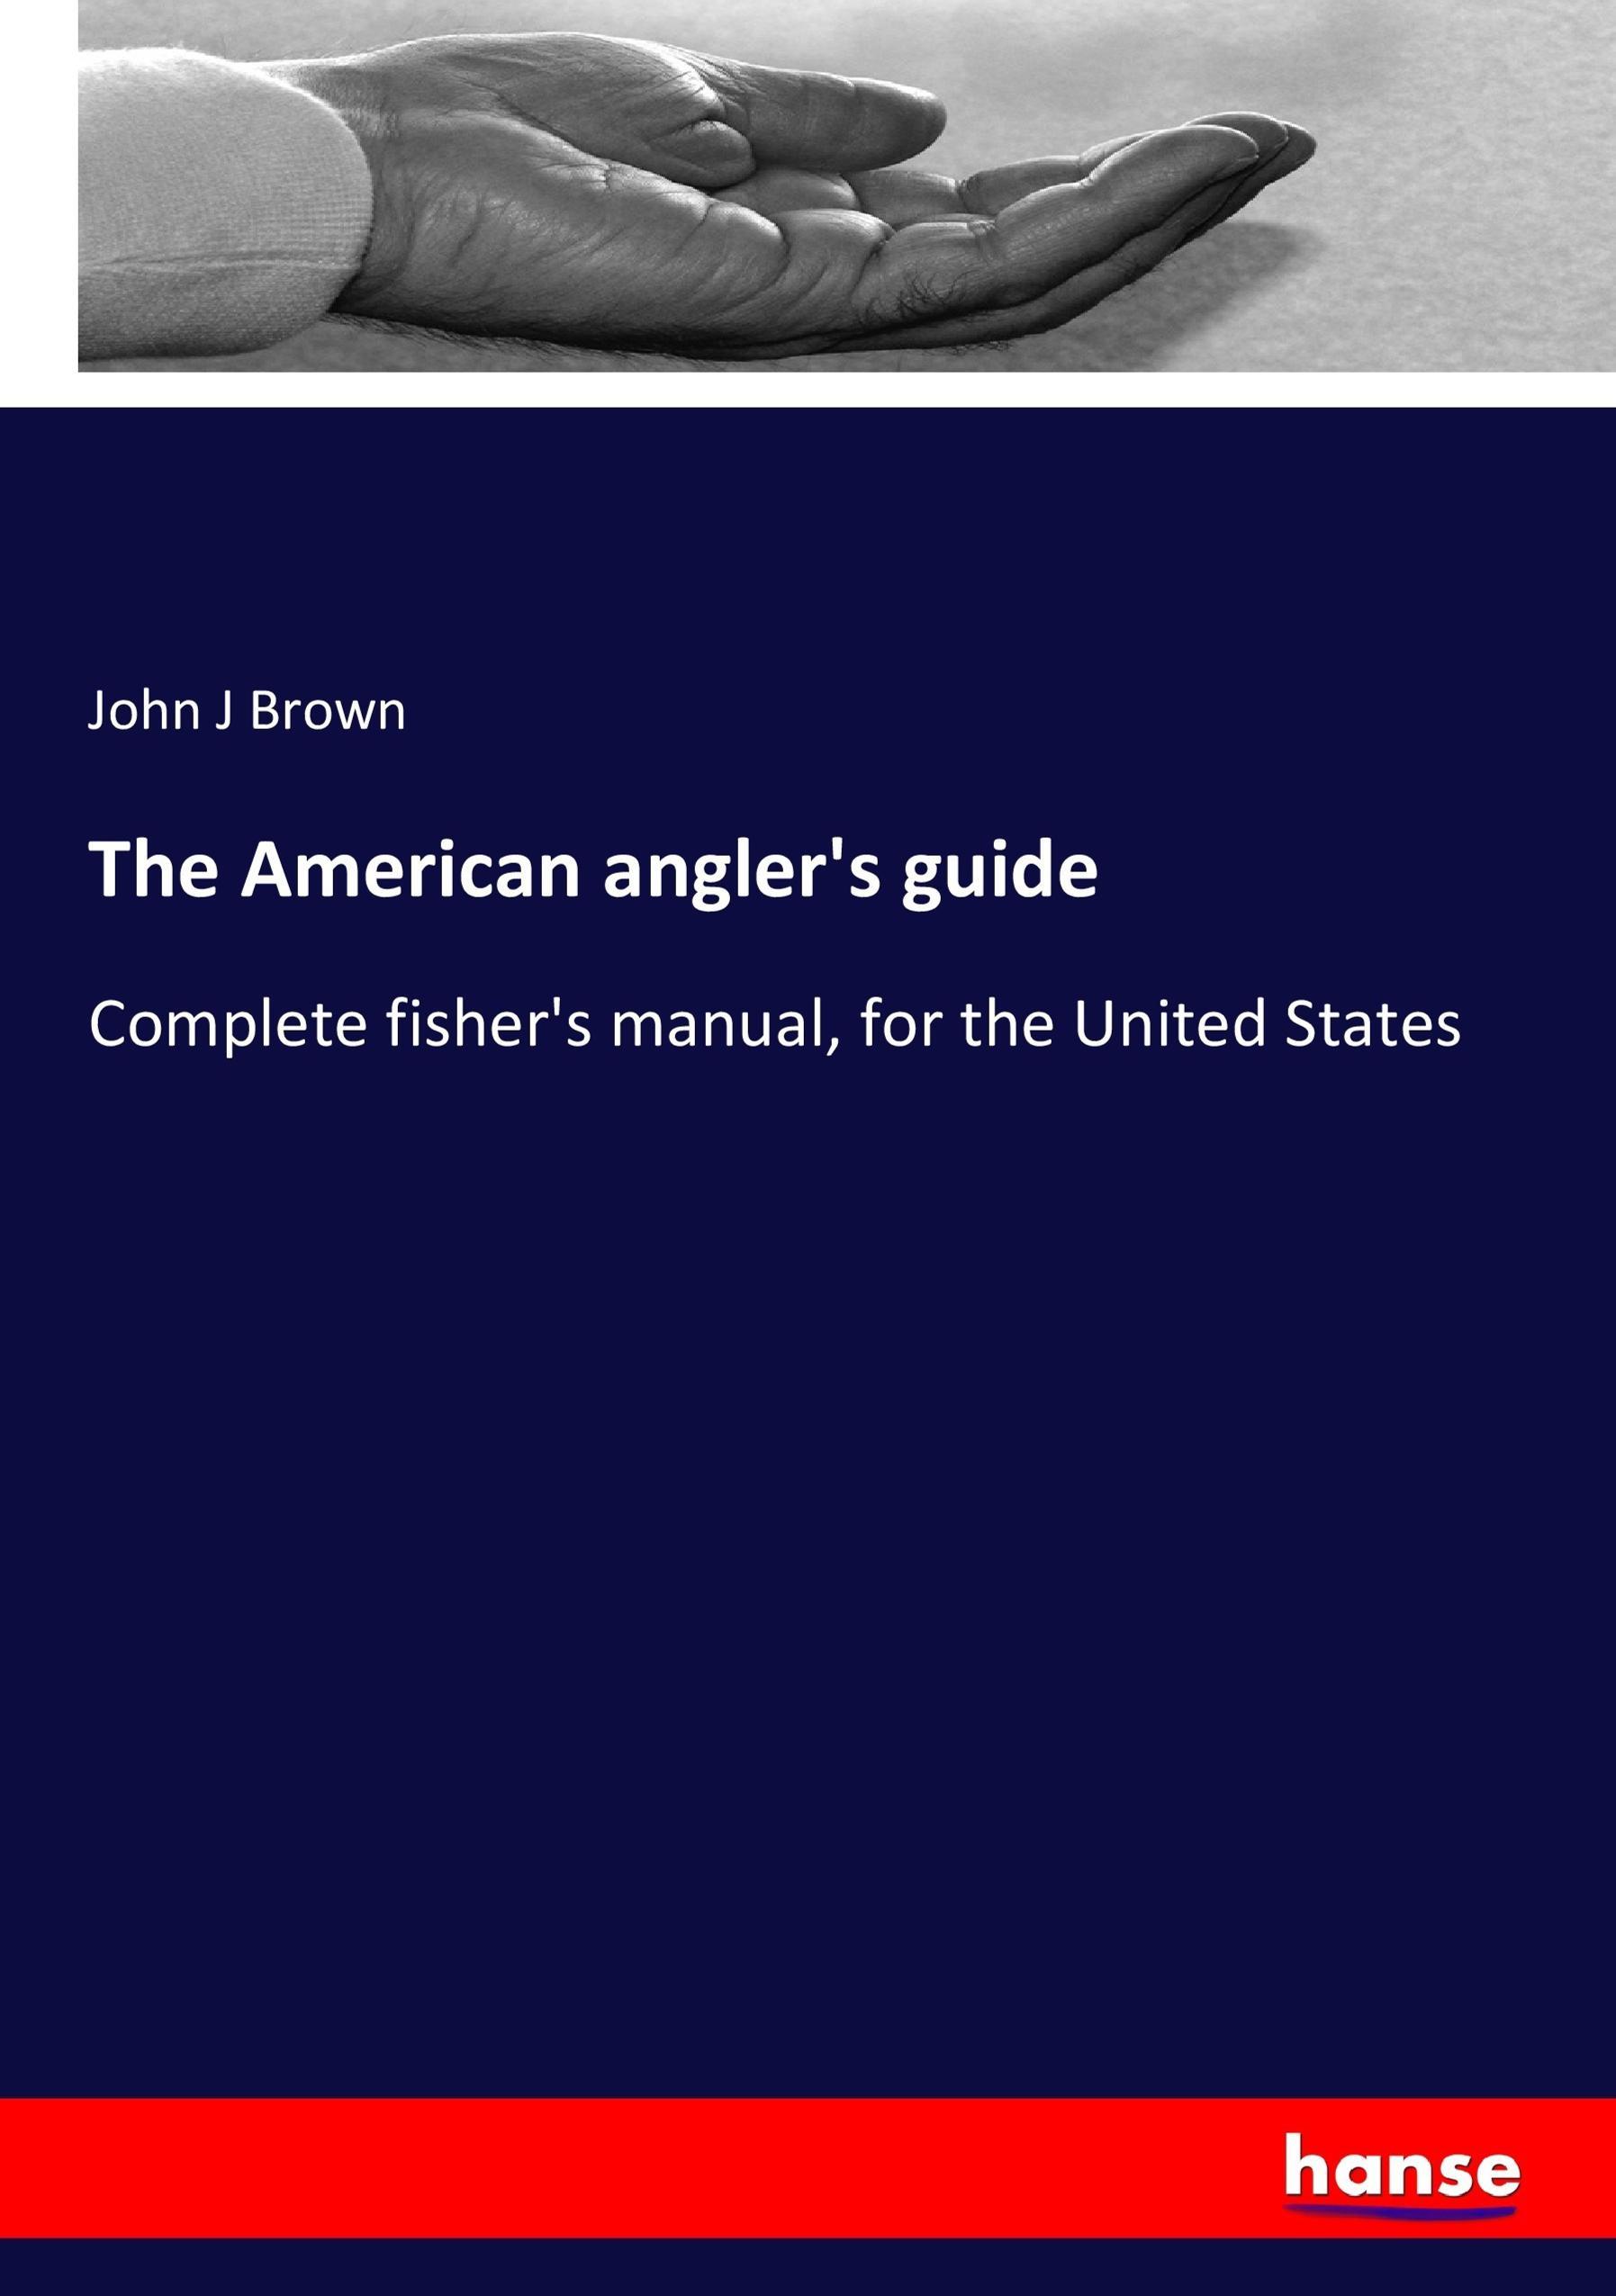 The American angler's guide | Complete fisher's manual, for the United States | John J Brown | Taschenbuch | Paperback | 492 S. | Englisch | 2017 | hansebooks | EAN 9783337374594 - Brown, John J